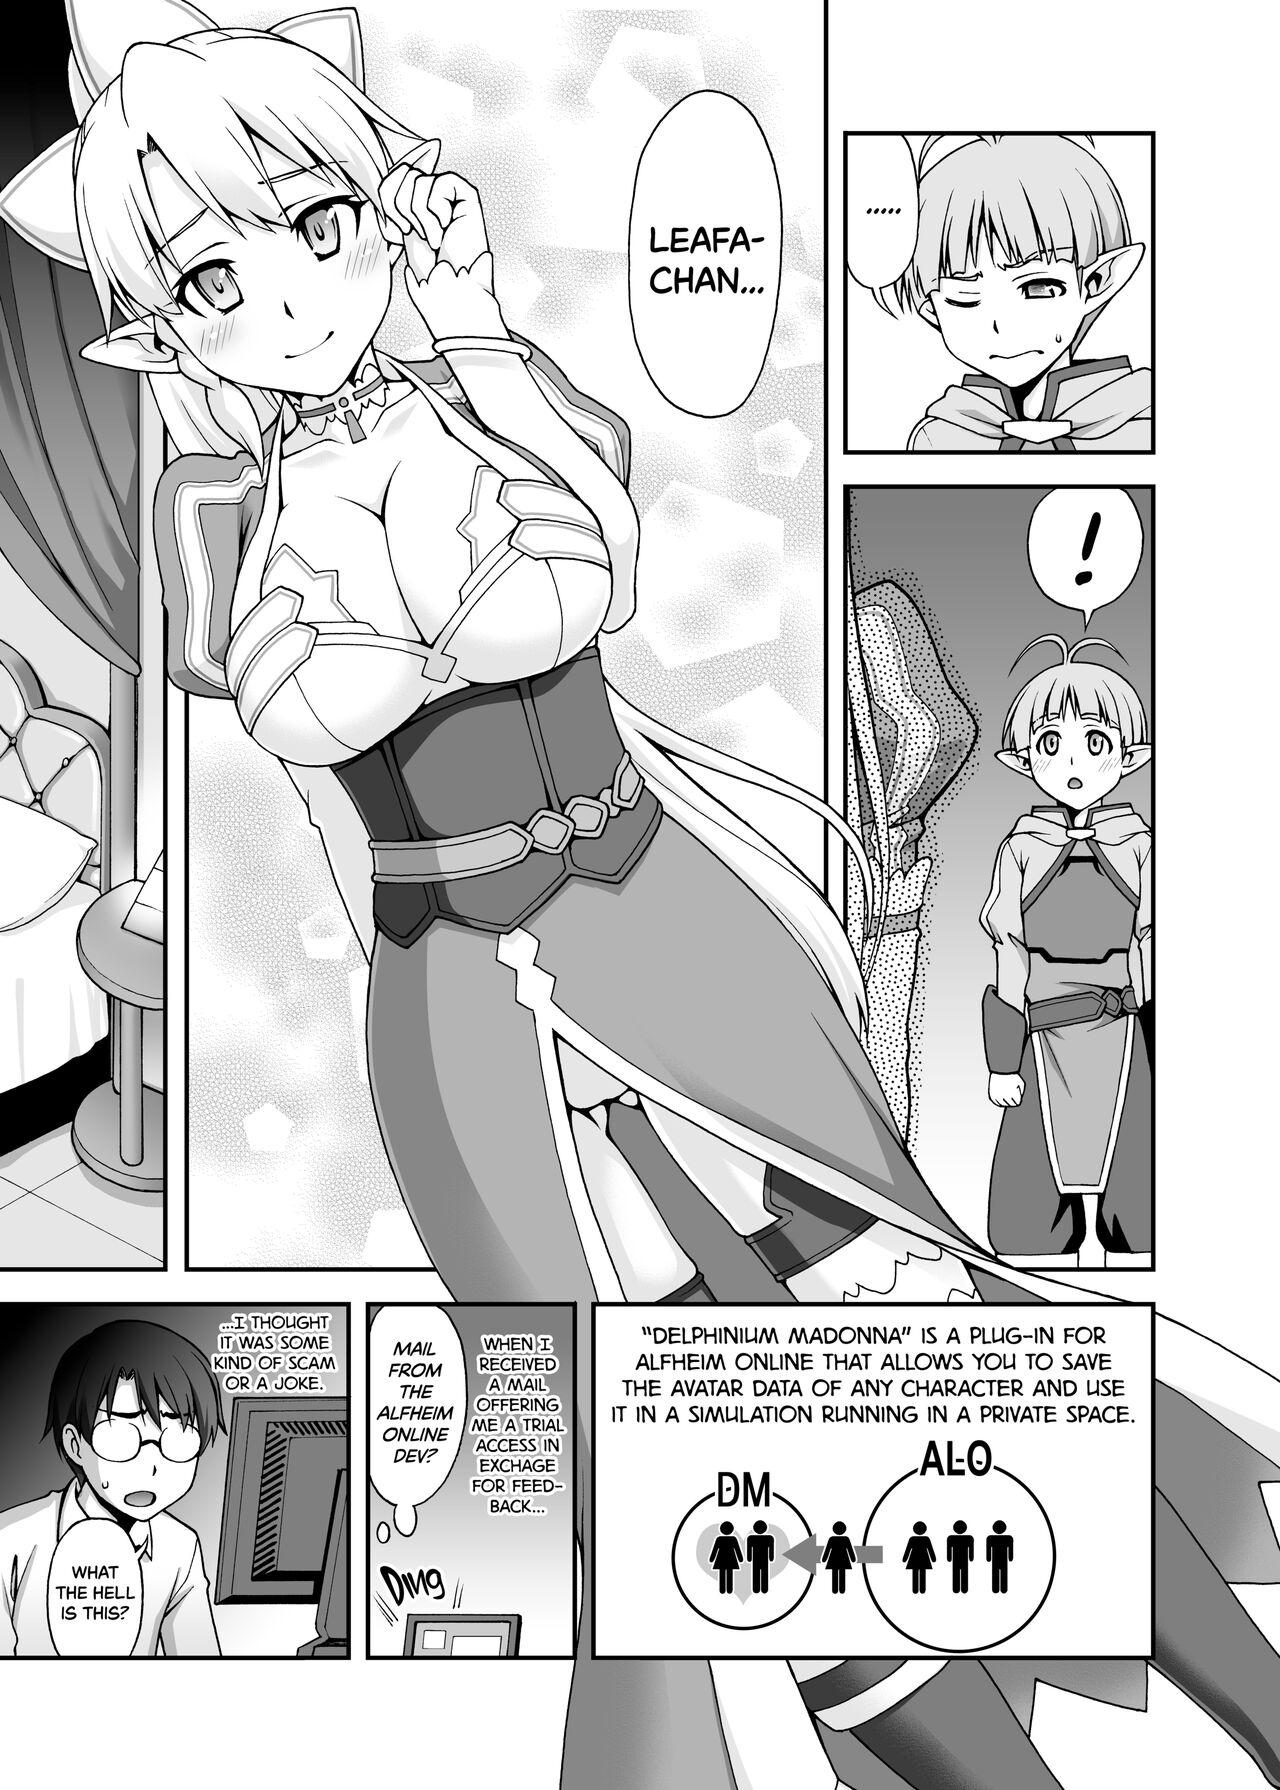 Throatfuck Delphinium Madonna 2 - Sword art online Family Roleplay - Page 6